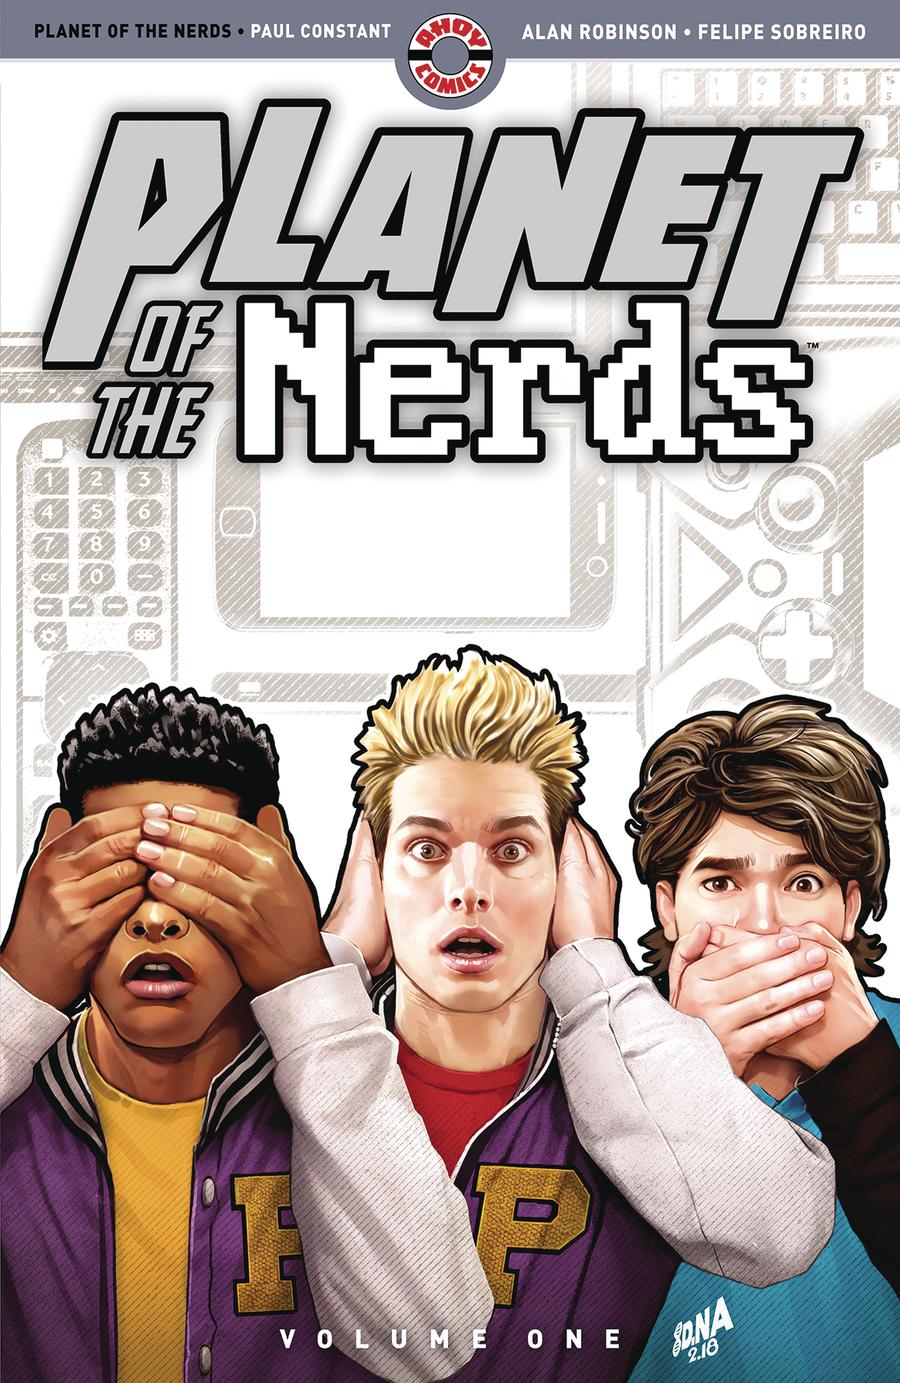 Planet Of The Nerds Vol 1 TP